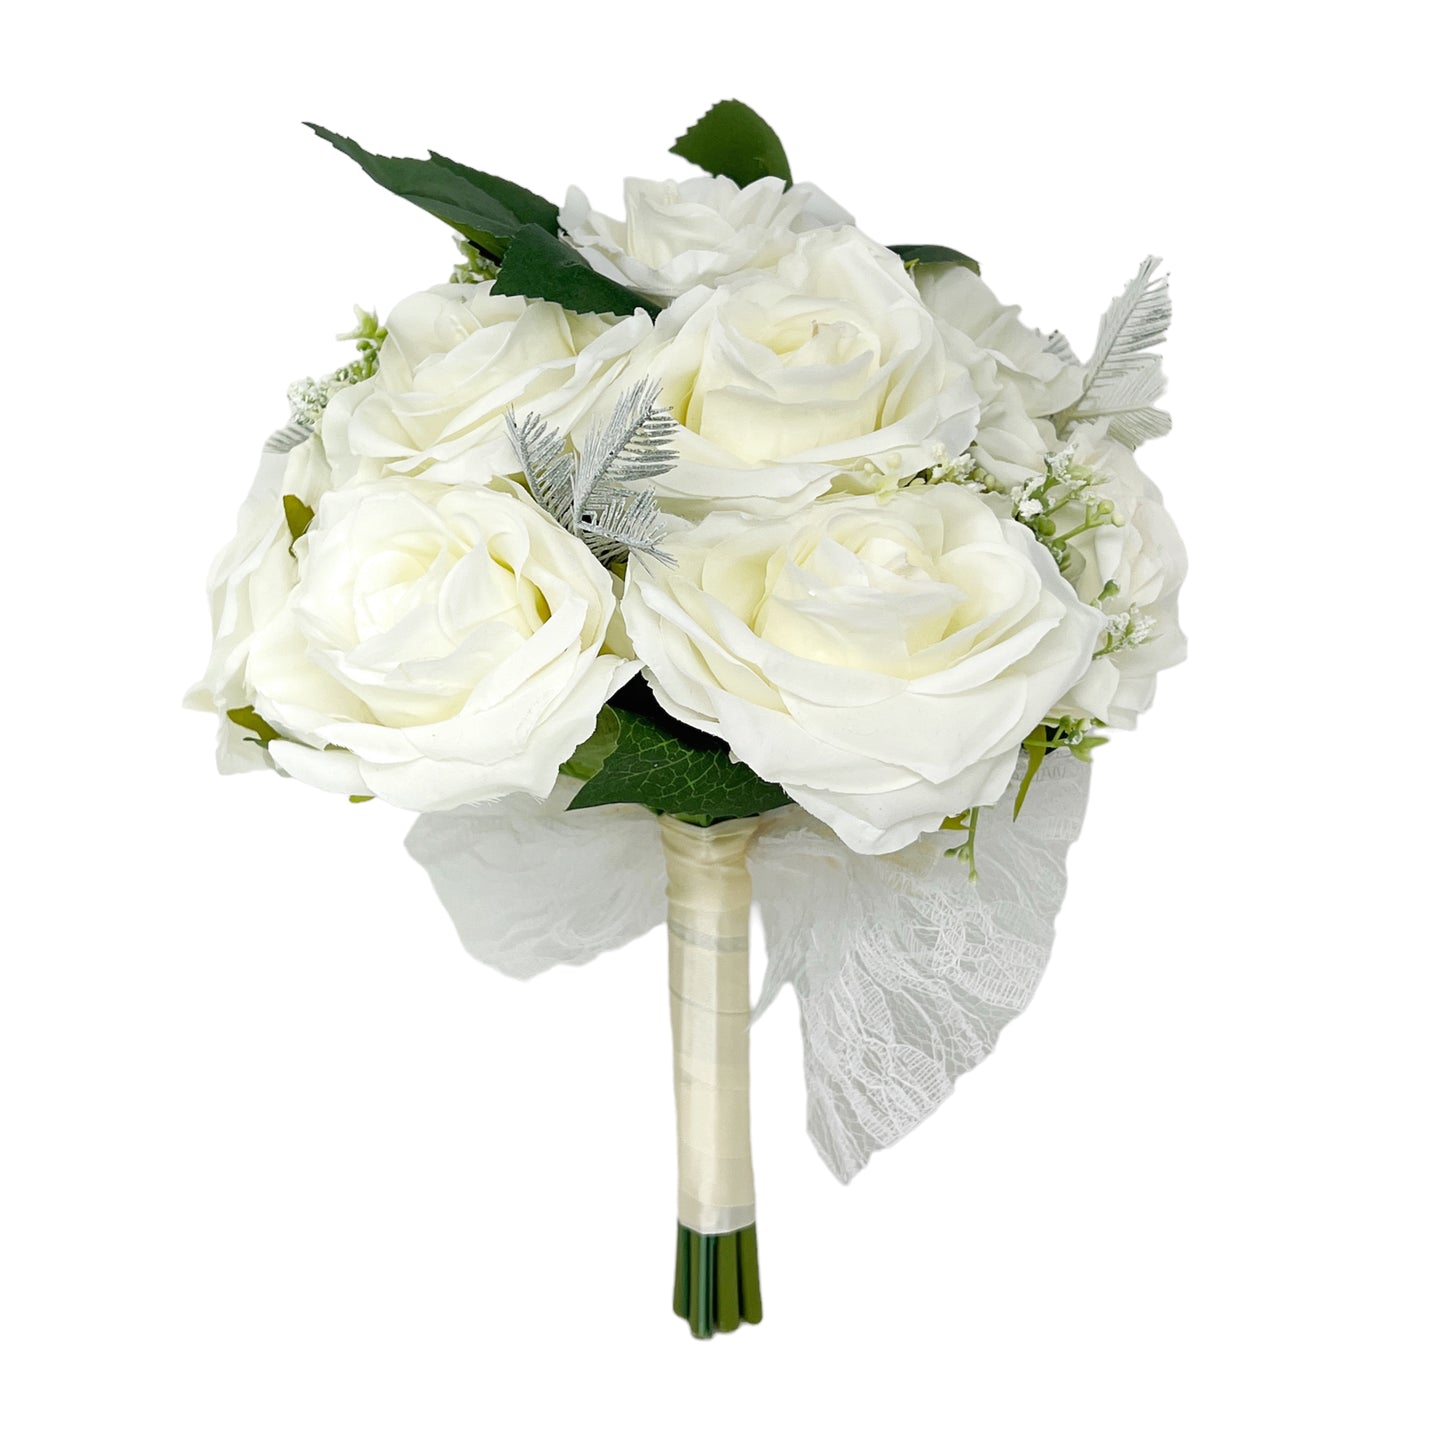 Artificial Rose Wedding Bouquet for Bridal and Bridesmaids in White/Pink with Lace Bow